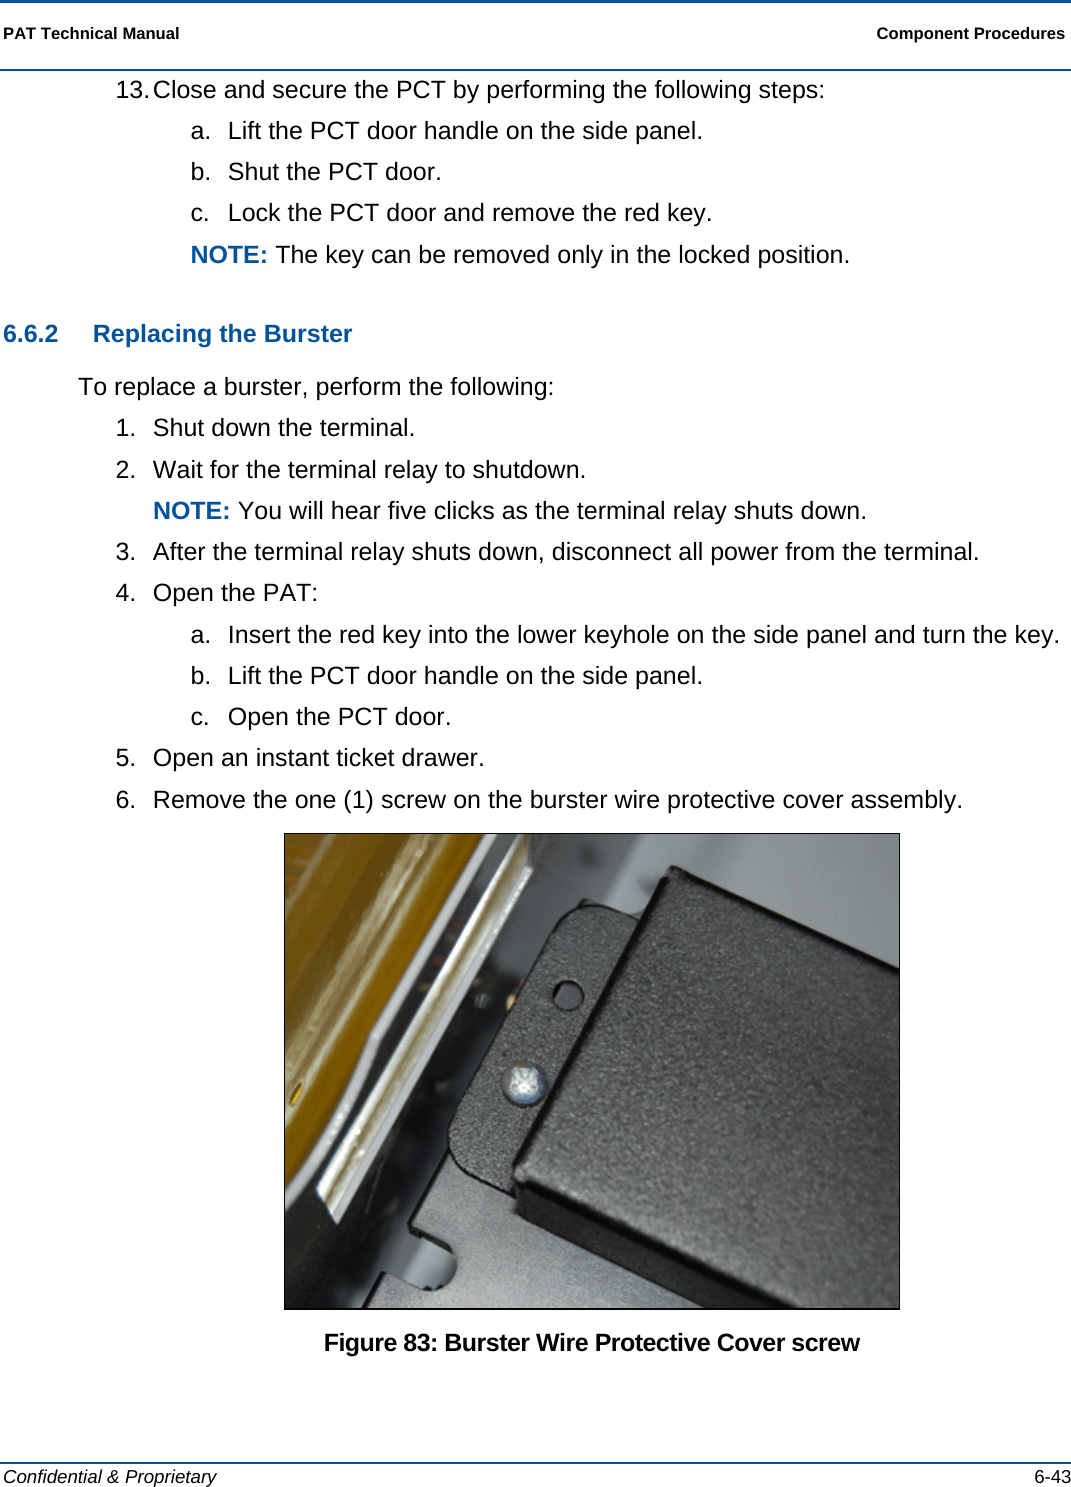  PAT Technical Manual  Component Procedures  Confidential &amp; Proprietary   6-43 13. Close and secure the PCT by performing the following steps: a.  Lift the PCT door handle on the side panel. b.  Shut the PCT door. c.  Lock the PCT door and remove the red key. NOTE: The key can be removed only in the locked position. 6.6.2  Replacing the Burster To replace a burster, perform the following: 1.  Shut down the terminal.  2.  Wait for the terminal relay to shutdown. NOTE: You will hear five clicks as the terminal relay shuts down. 3.  After the terminal relay shuts down, disconnect all power from the terminal. 4.  Open the PAT: a.  Insert the red key into the lower keyhole on the side panel and turn the key. b.  Lift the PCT door handle on the side panel. c.  Open the PCT door.  5.  Open an instant ticket drawer. 6.  Remove the one (1) screw on the burster wire protective cover assembly.  Figure 83: Burster Wire Protective Cover screw 